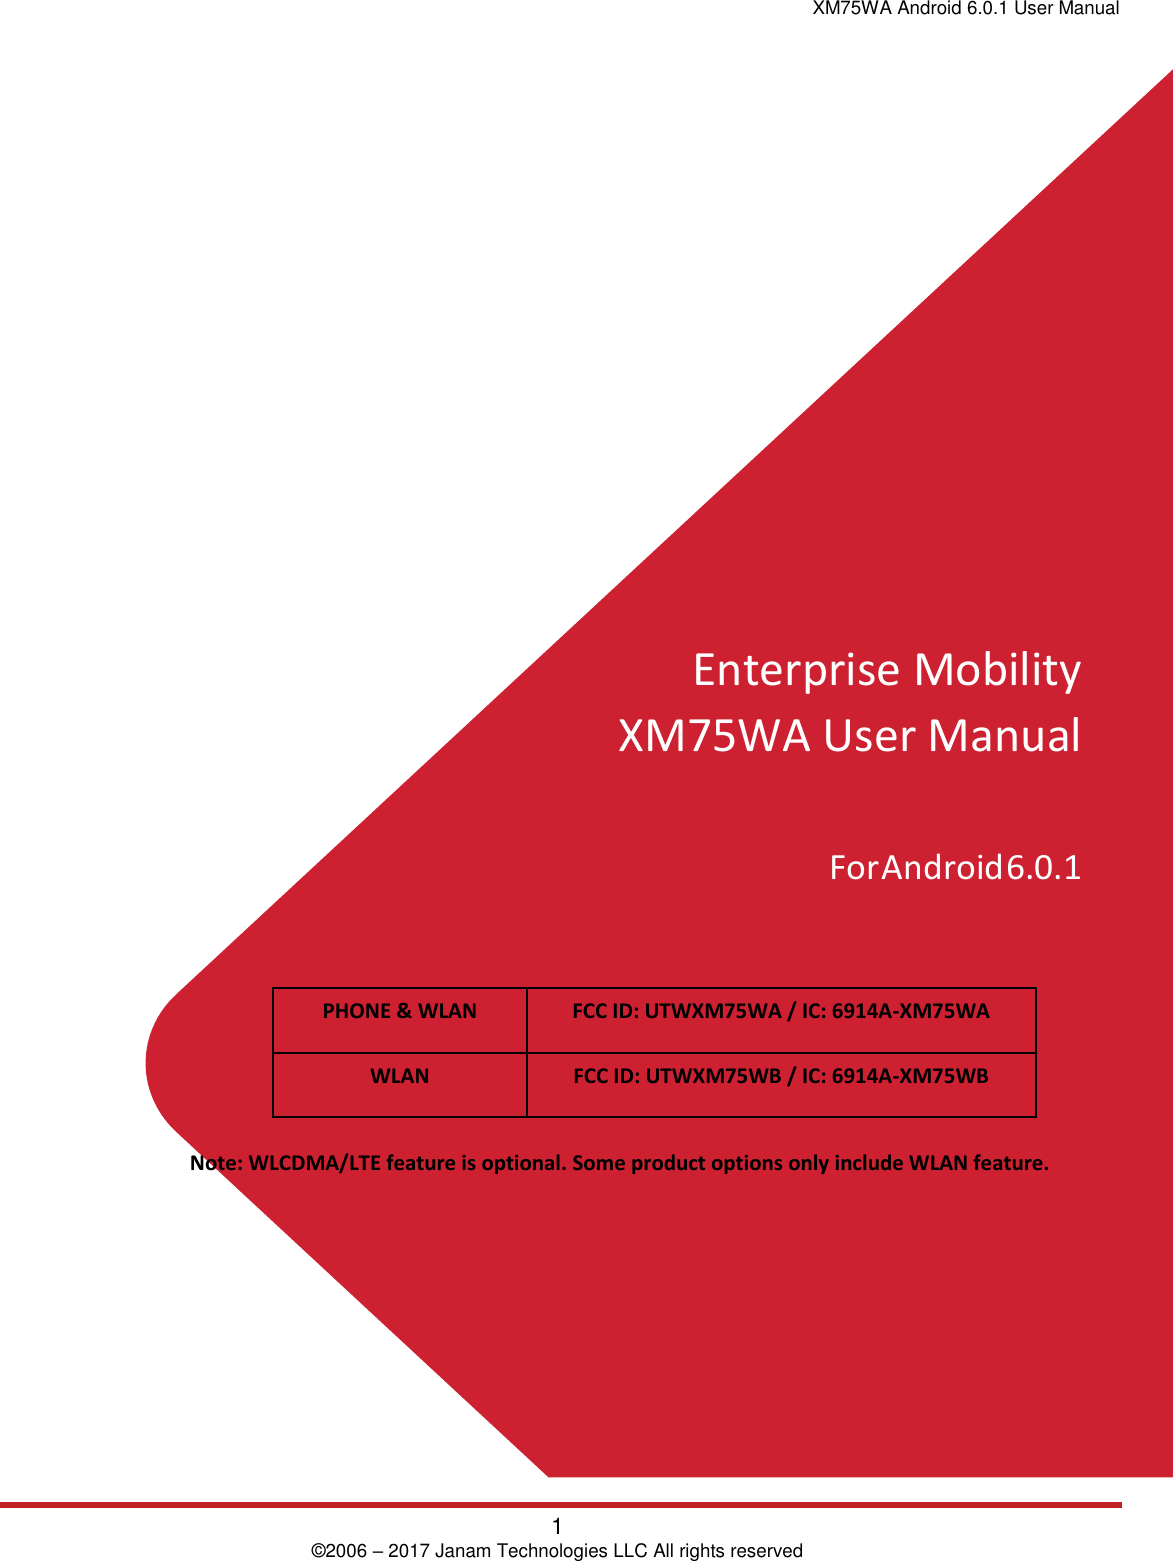 XM75WA Android 6.0.1 User Manual 1 © 2006 – 2017 Janam Technologies LLC All rights reserved Enterprise Mobility XM75WA User Manual For Android 6.0.1 PHONE &amp; WLAN FCC ID: UTWXM75WA / IC: 6914A-XM75WA WLAN FCC ID: UTWXM75WB / IC: 6914A-XM75WB Note: WLCDMA/LTE feature is optional. Some product options only include WLAN feature. 